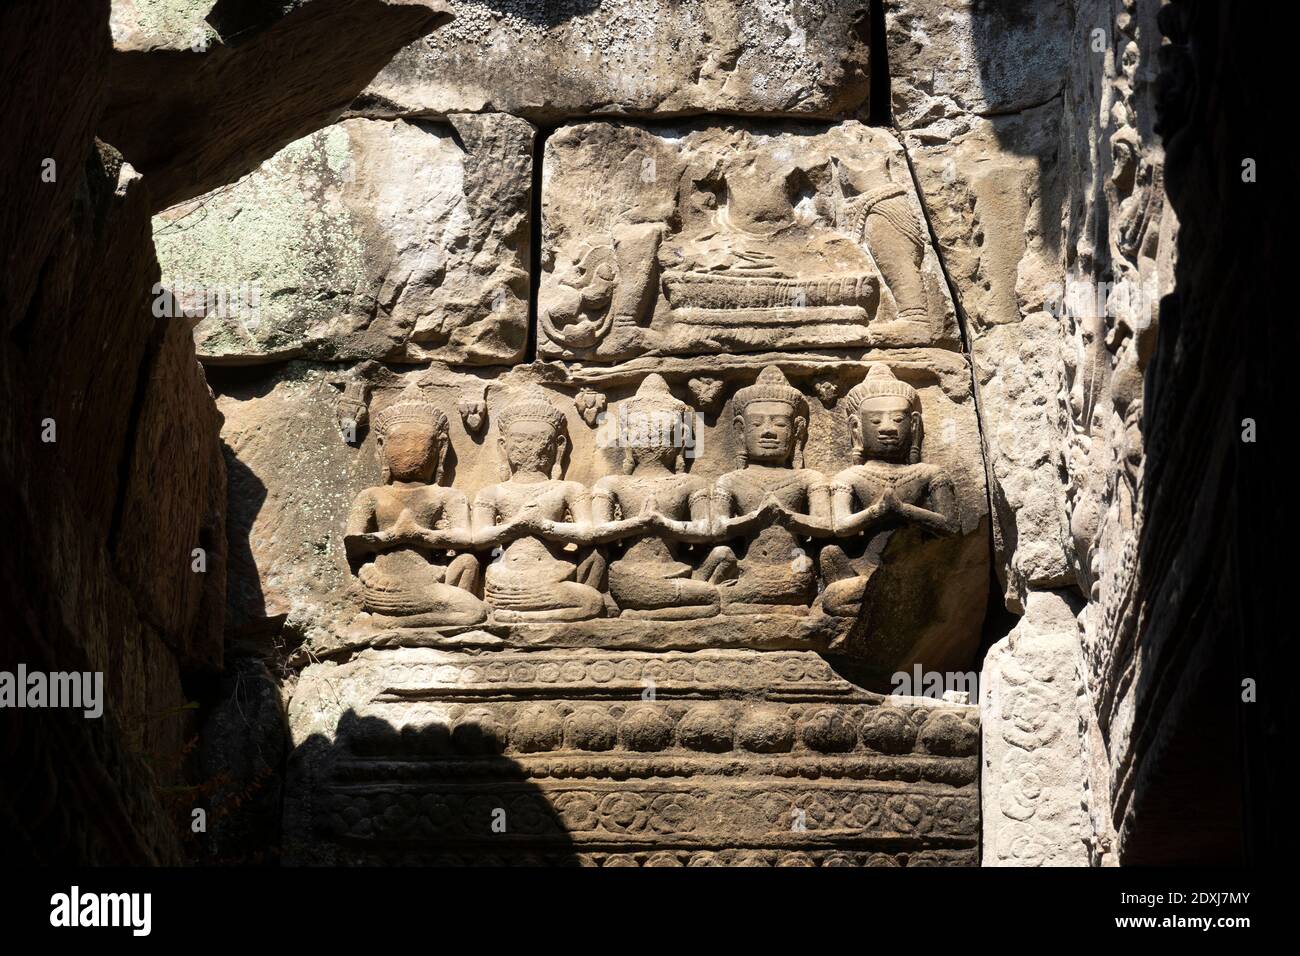 Bas-relief on the walls of Preah Khan temple Stock Photo